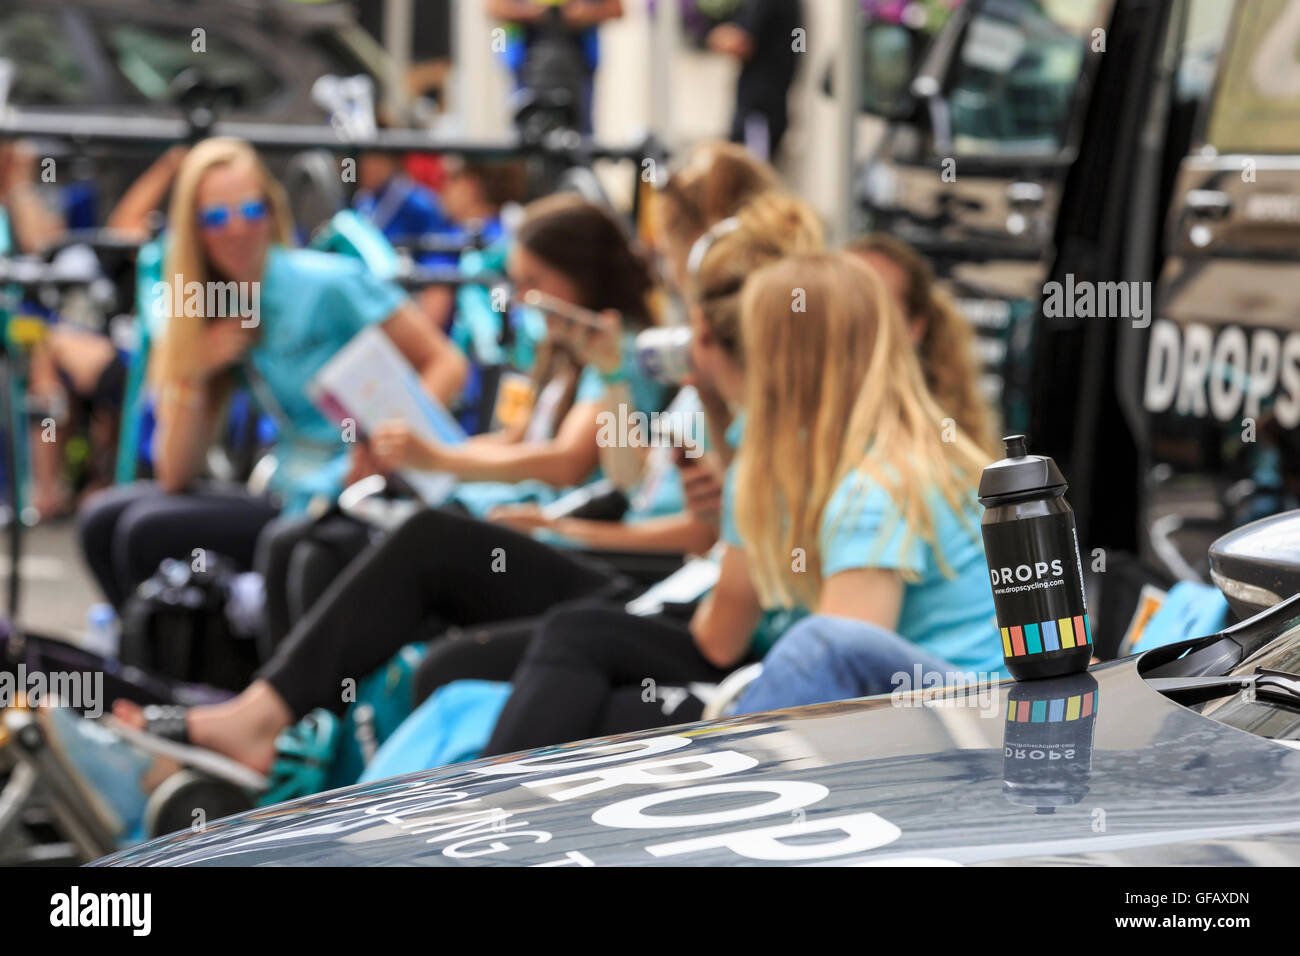 London, UK, 30 July 2016. Prudential RideLondon Classique. The Drops Cycling Team, featuring Under 23 National Champion Alice Barnes, relax prior to the start of the RideLondon Classique - a 66km race which forms part of the UCI Women's World Tour. Credit:  Clive Jones/Alamy Live News Stock Photo